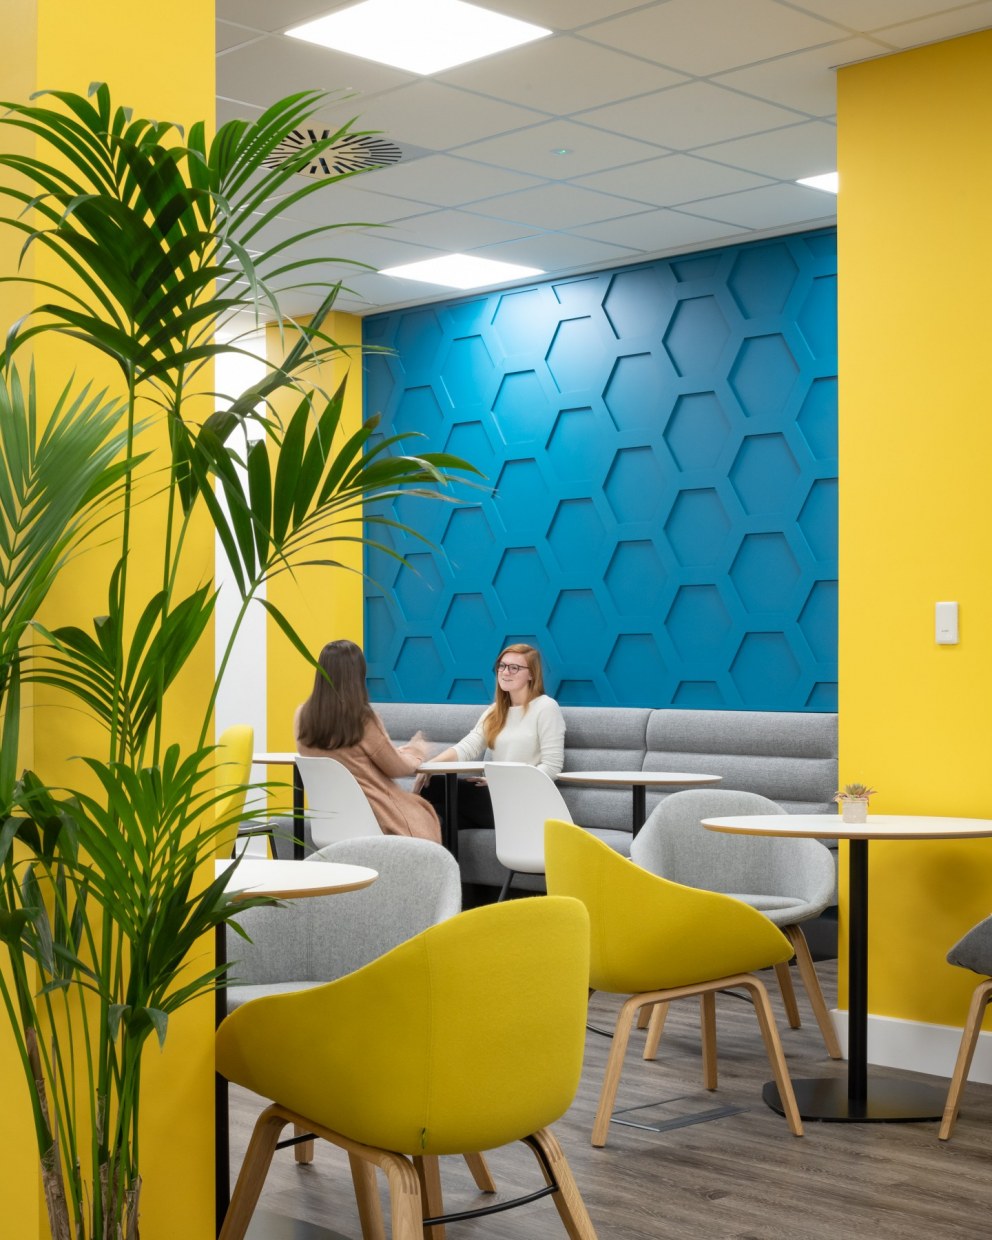 Rethink Events - Workplace Design | Breakout area - honeycomb feature wall | Interior Designers